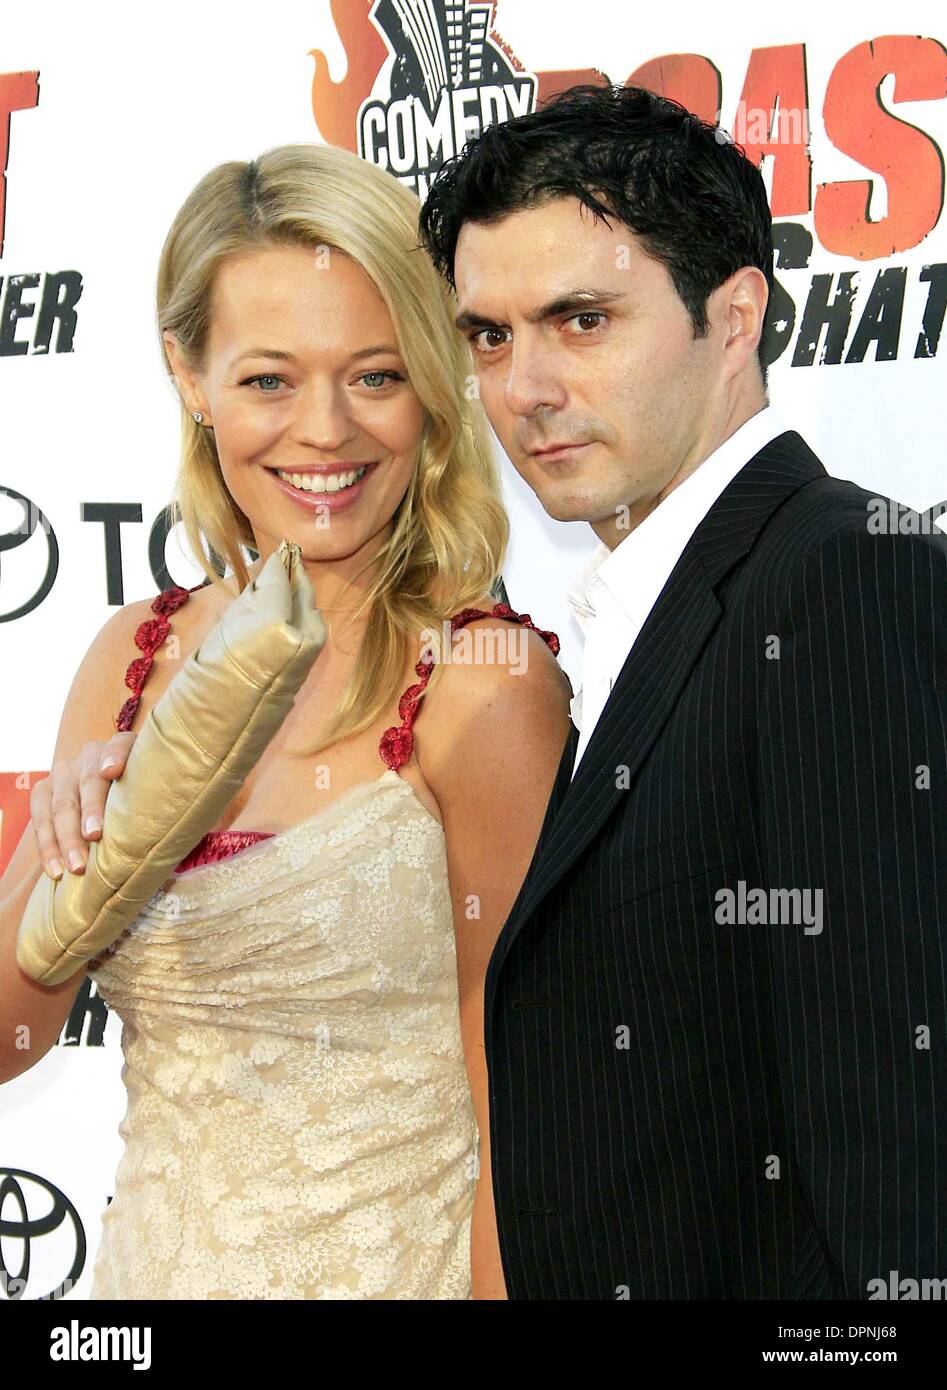 Aug. 13, 2006 - Studio City, CALIFORNIA, USA - JERI RYAN AND CHRISTOPHE EME (HE OWNS THE ORTOLAN RESTAURANT WITH HER IN LOS ANGELES) -.COMEDY CENTRAL'S ROAST OF WILLIAM SHATNER -.CBS, STUDIO Studio City, CALIFORNIA - .08-13-2006 -. NINA PROMMER/   2006.K49290NP(Credit Image: © Globe Photos/ZUMAPRESS.com) Stock Photo